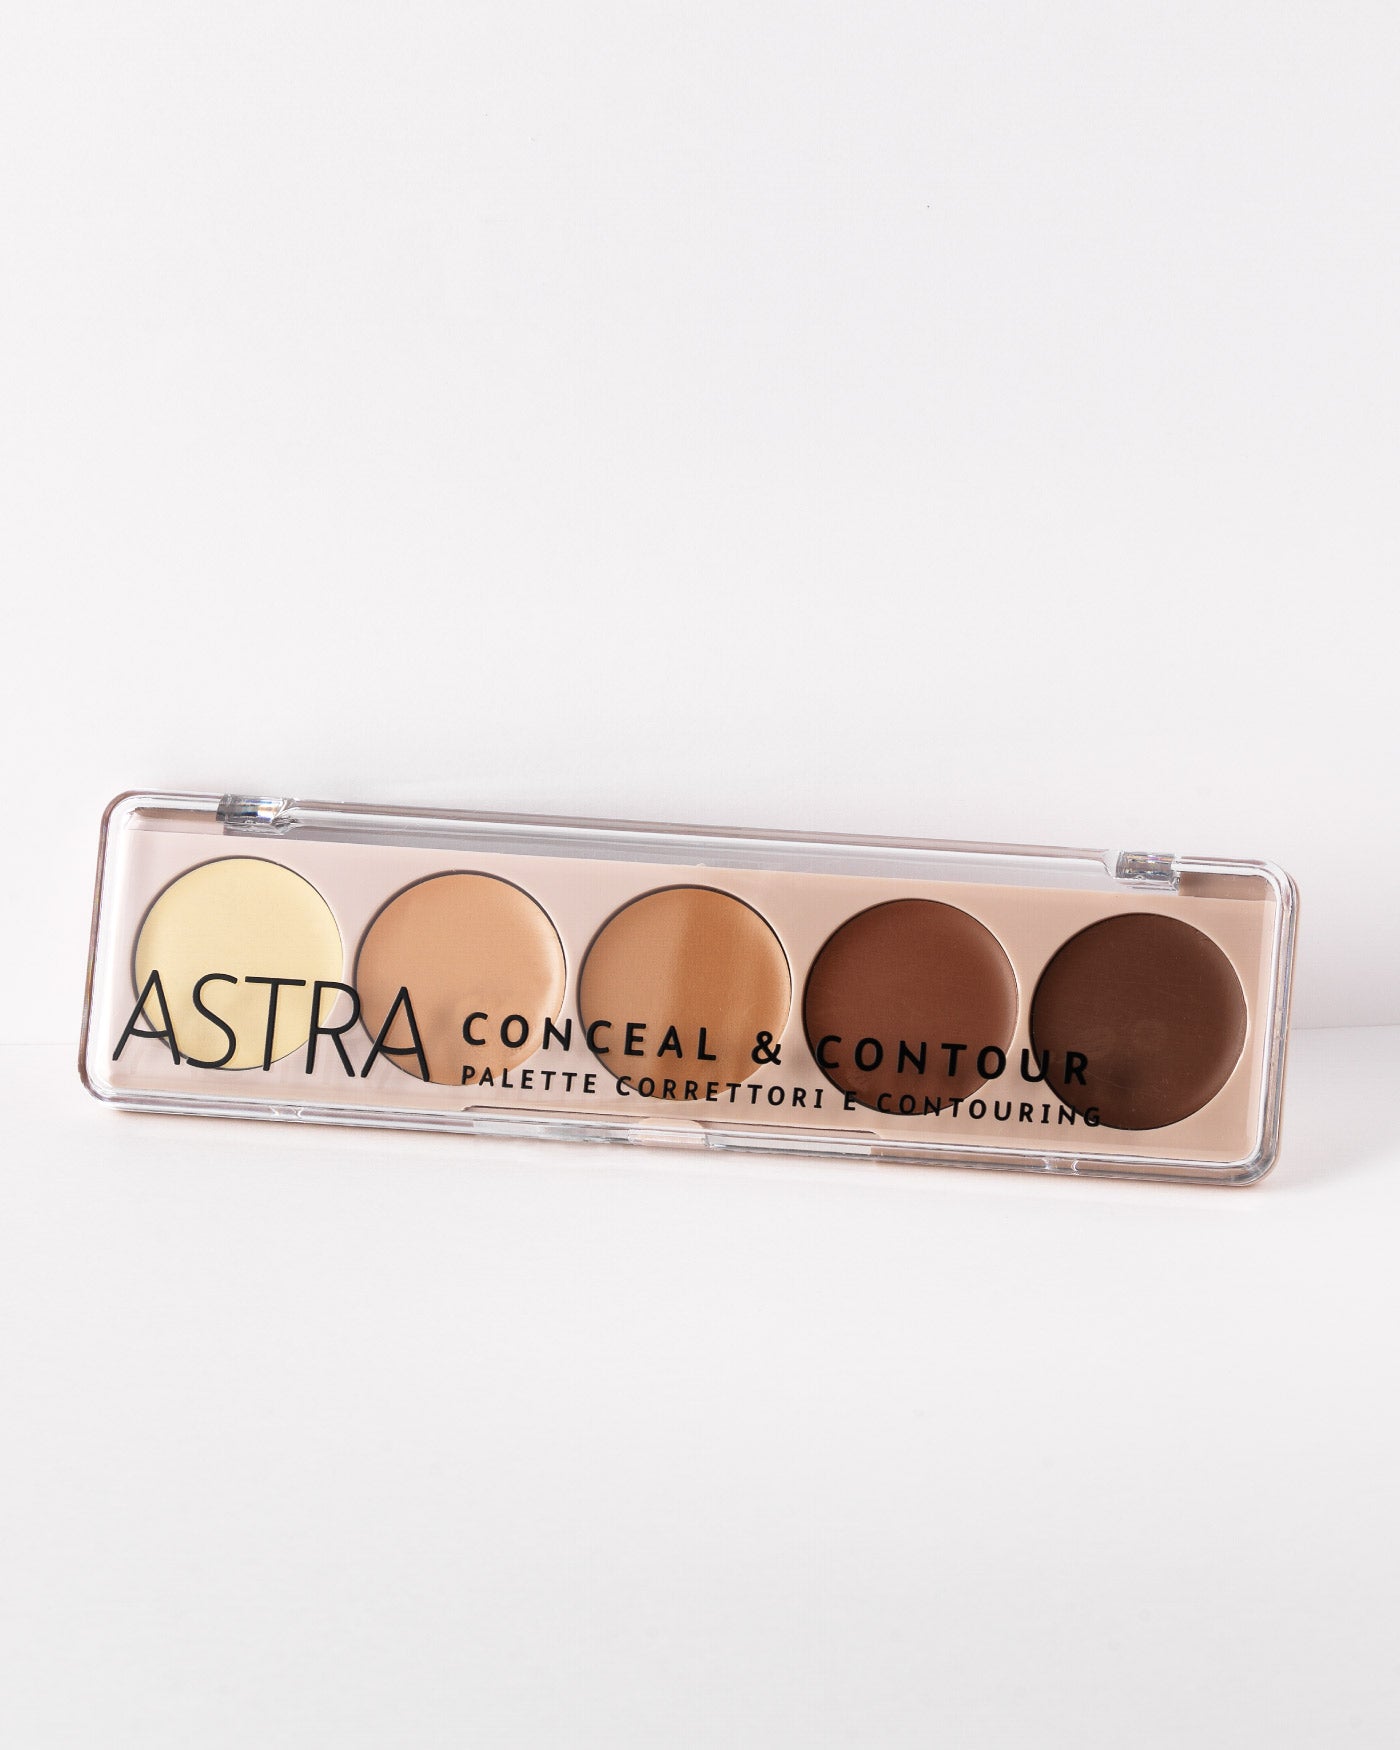 CONCEAL & CONTOUR - All Products - Astra Make-Up